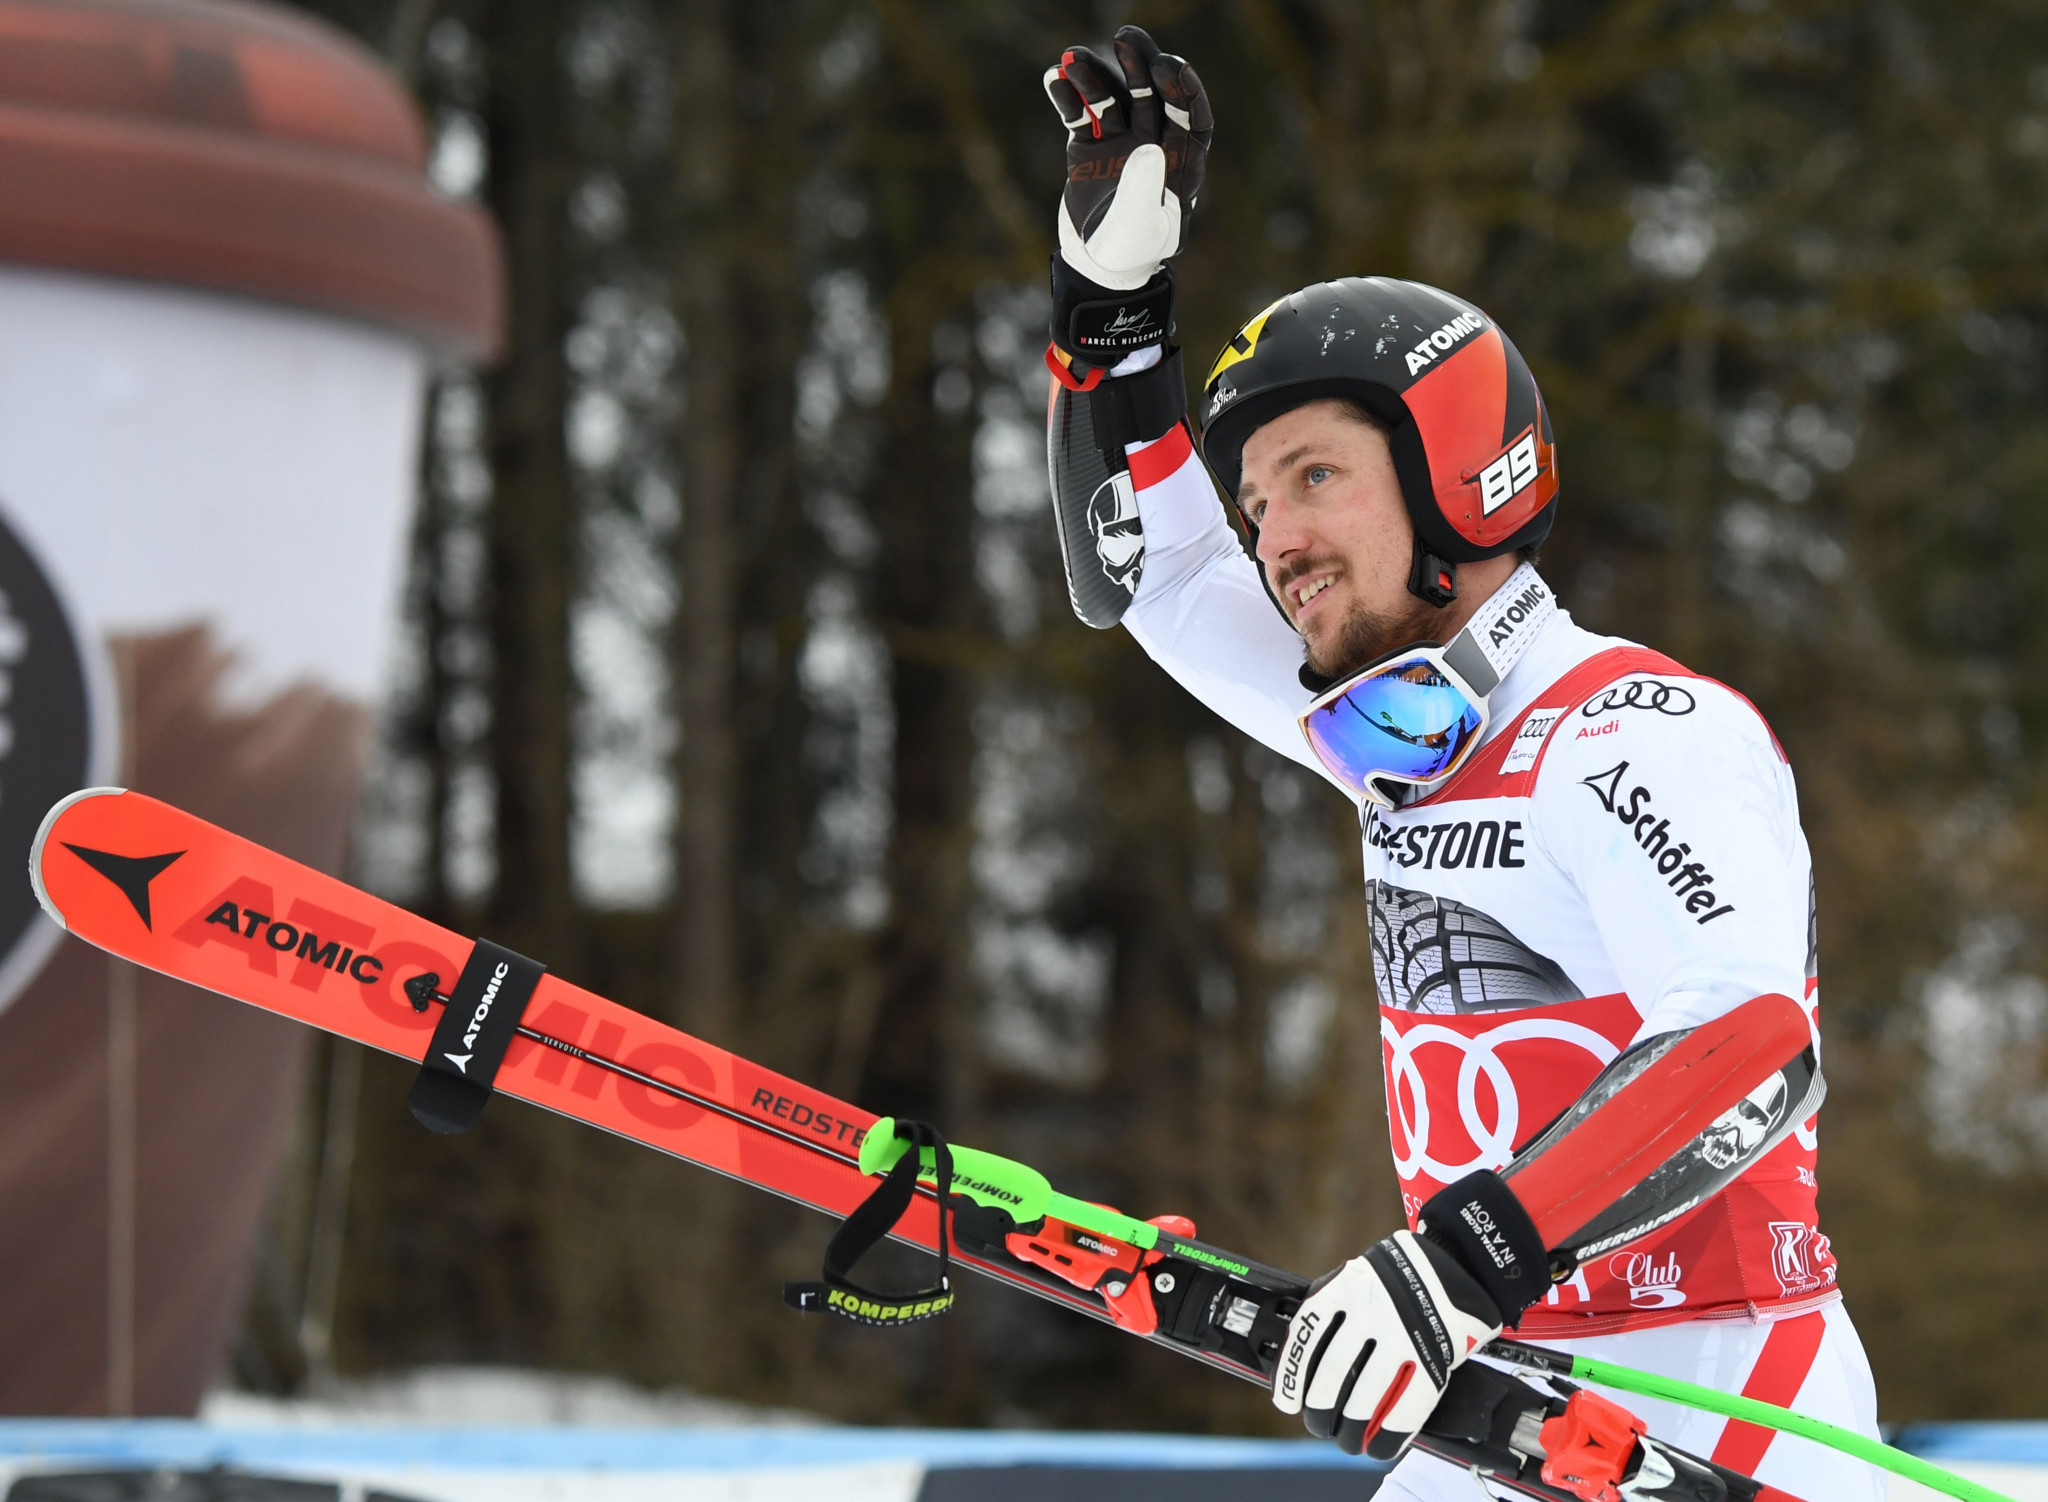 Serial World Cup winner Marcel Hirscher of Austria will compete in tomorrow night's Stockholm City Event before going on to the Winter Games ©Getty Images